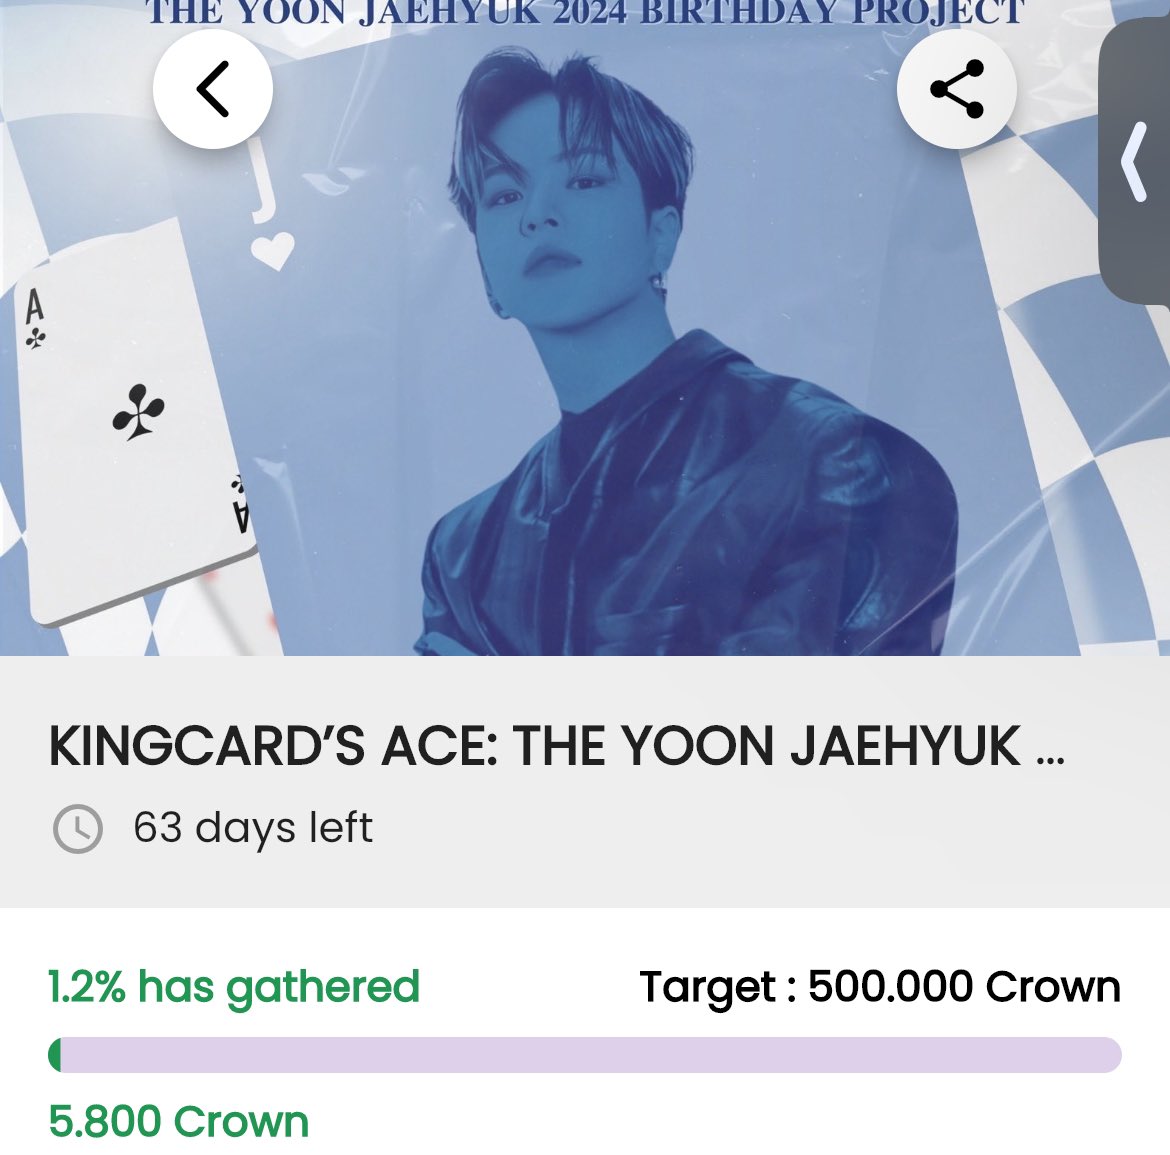 [🗳️] QUEERI FAN SUPPORT 🎯 5.800/500000 crowns 63 DAYS LEFT! You may watch ads and convert it to gold crowns or donate any amount to our @YJFSFunds! Let’s reach our goals for Jaehyuk. ALL IN FOR JAEHYUK #YOONJAEHYUK #윤재혁 #ユンジェヒョク @treasuremembers